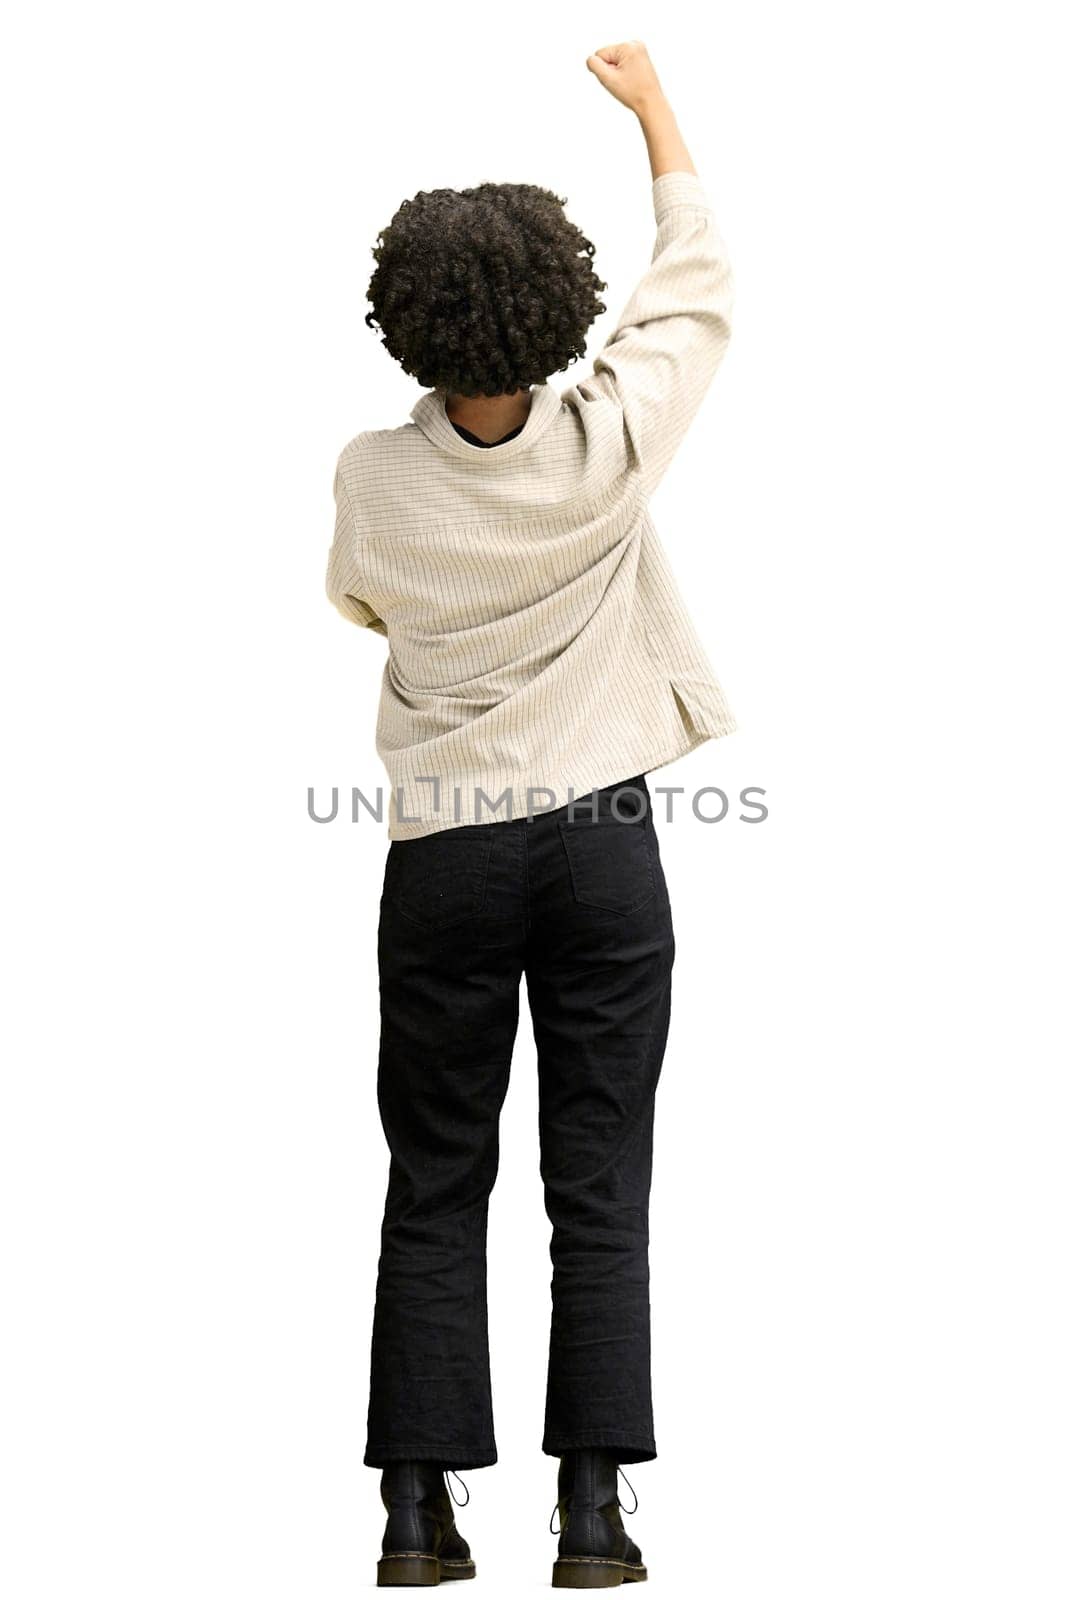 A woman, full-length, on a white background, rejoices by Prosto